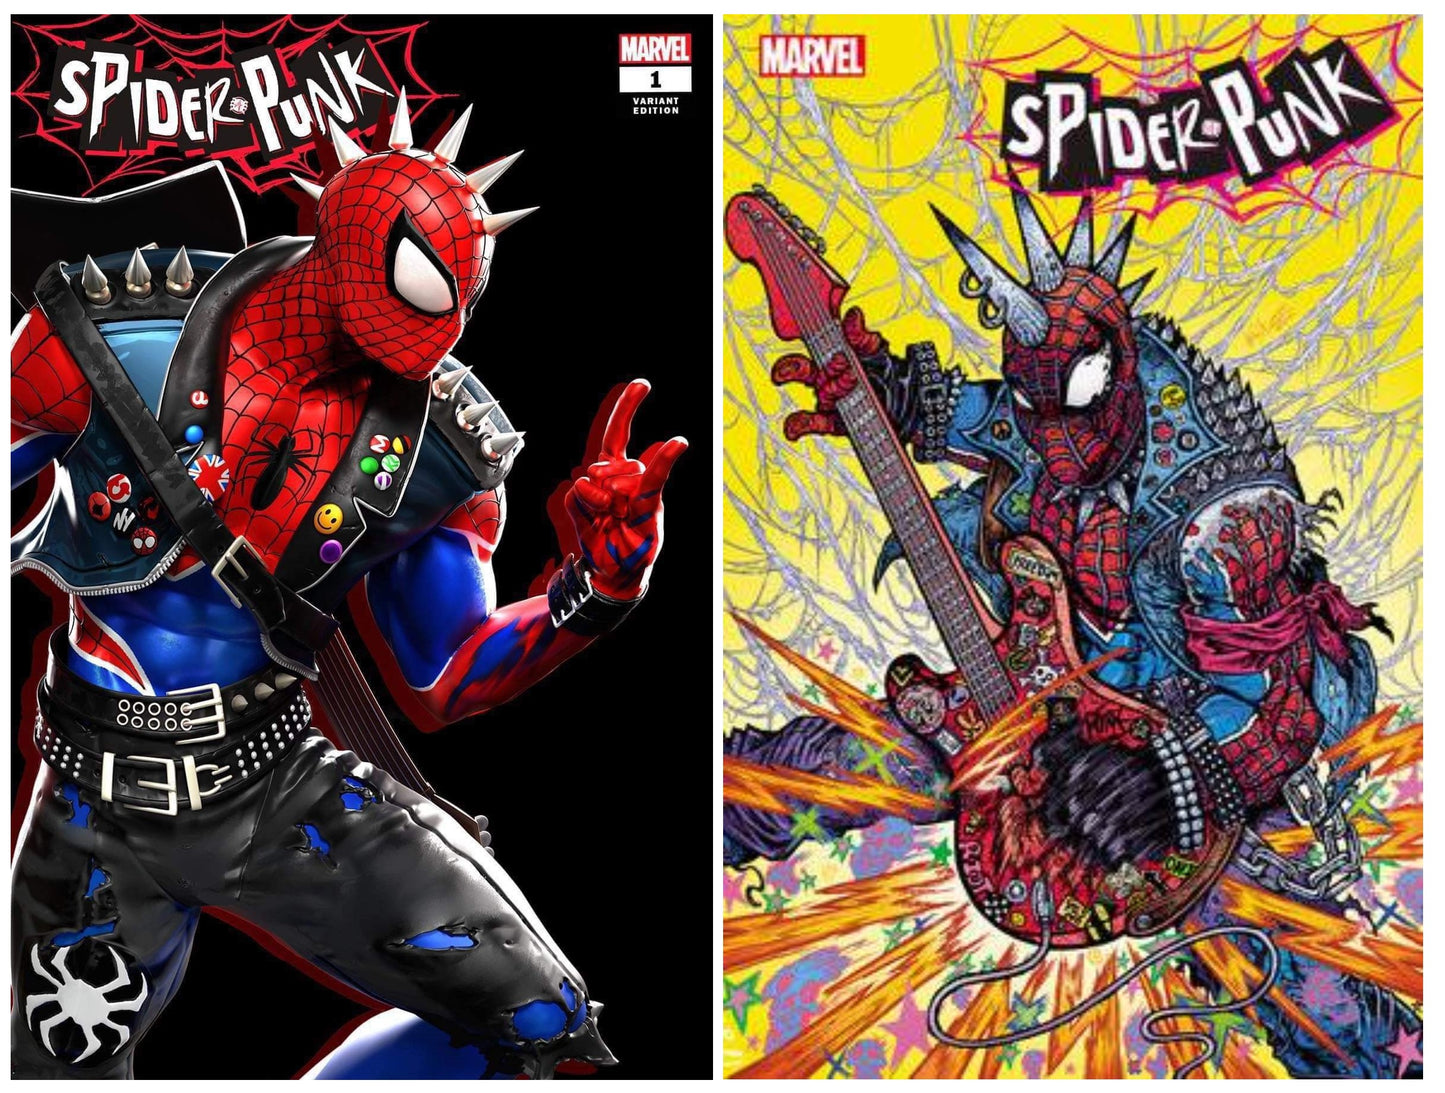 SPIDER-PUNK ARMS RACE #1 RAFAEL GRASSETTI VARIANT LIMITED TO 500 COPIES WITH NUMBERED COA + 1:25 VARIANT